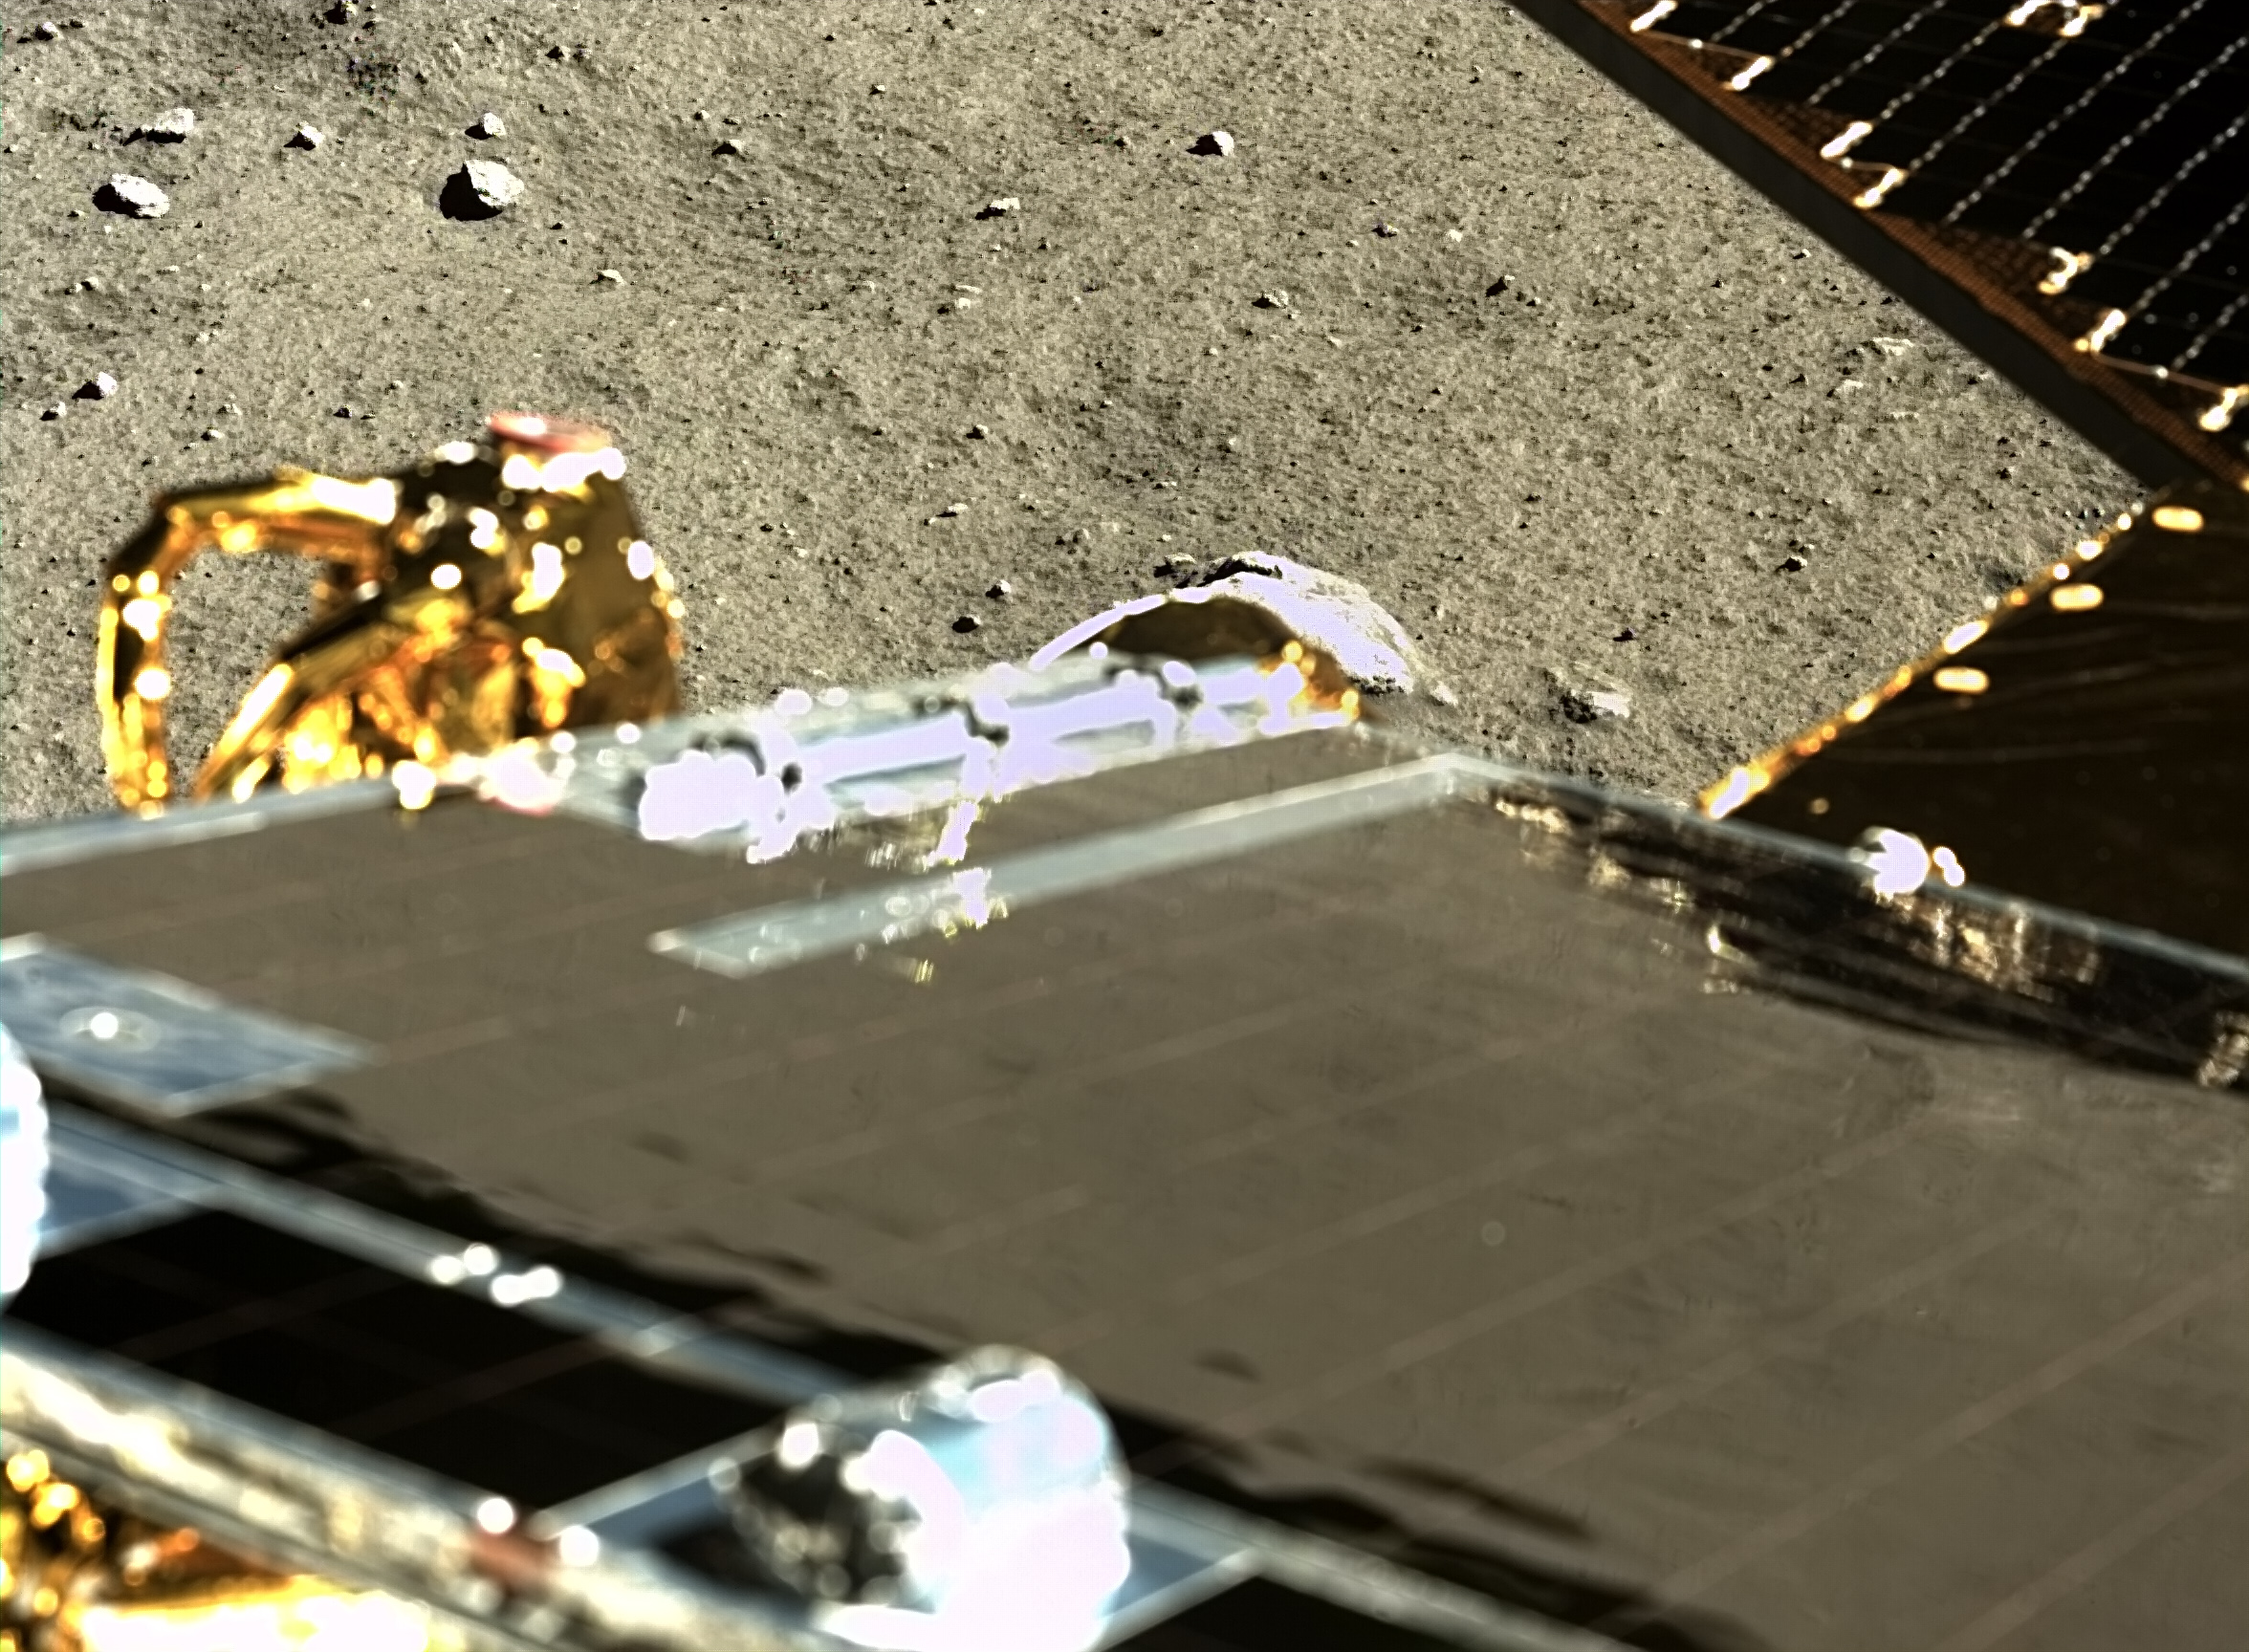 Chang'e 3 and Yutu images of the Moon